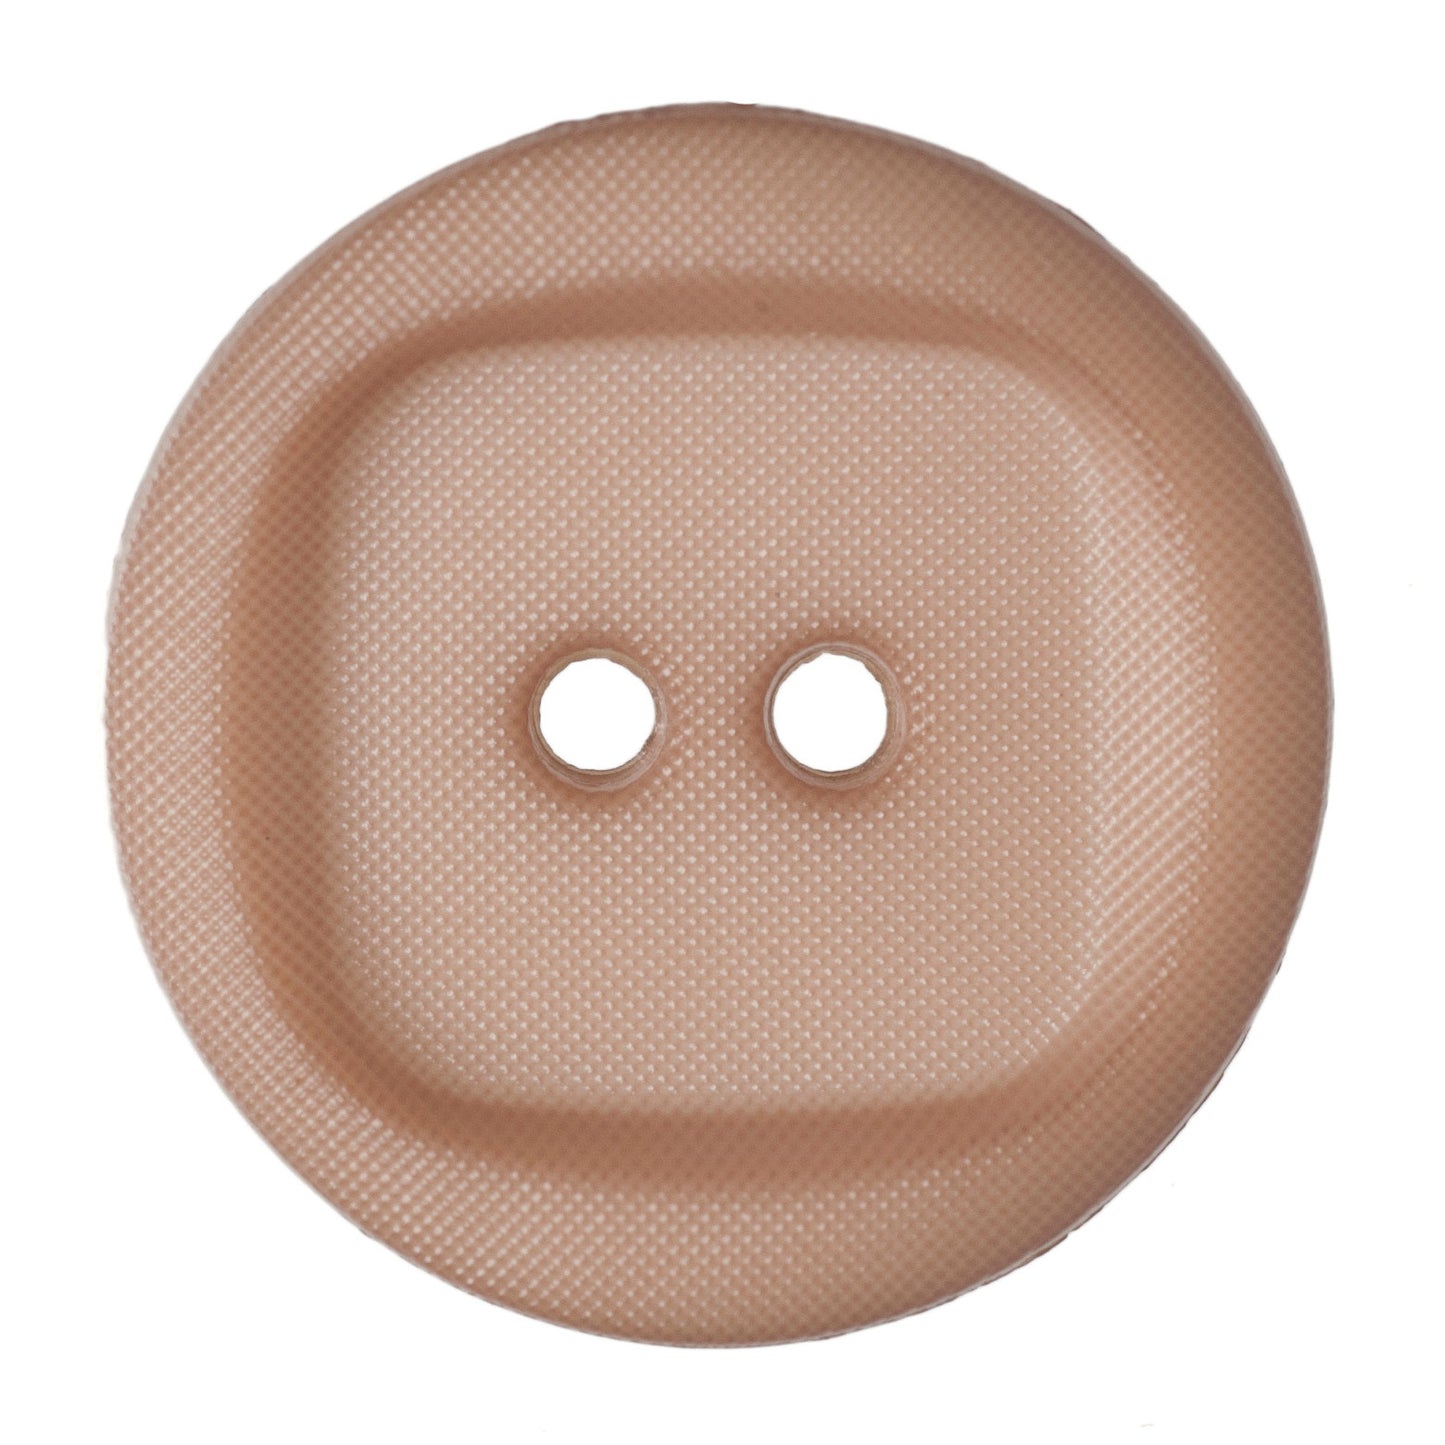 2 Hole Wavy with Square Insert Button - 20mm - Brown [LD6.8